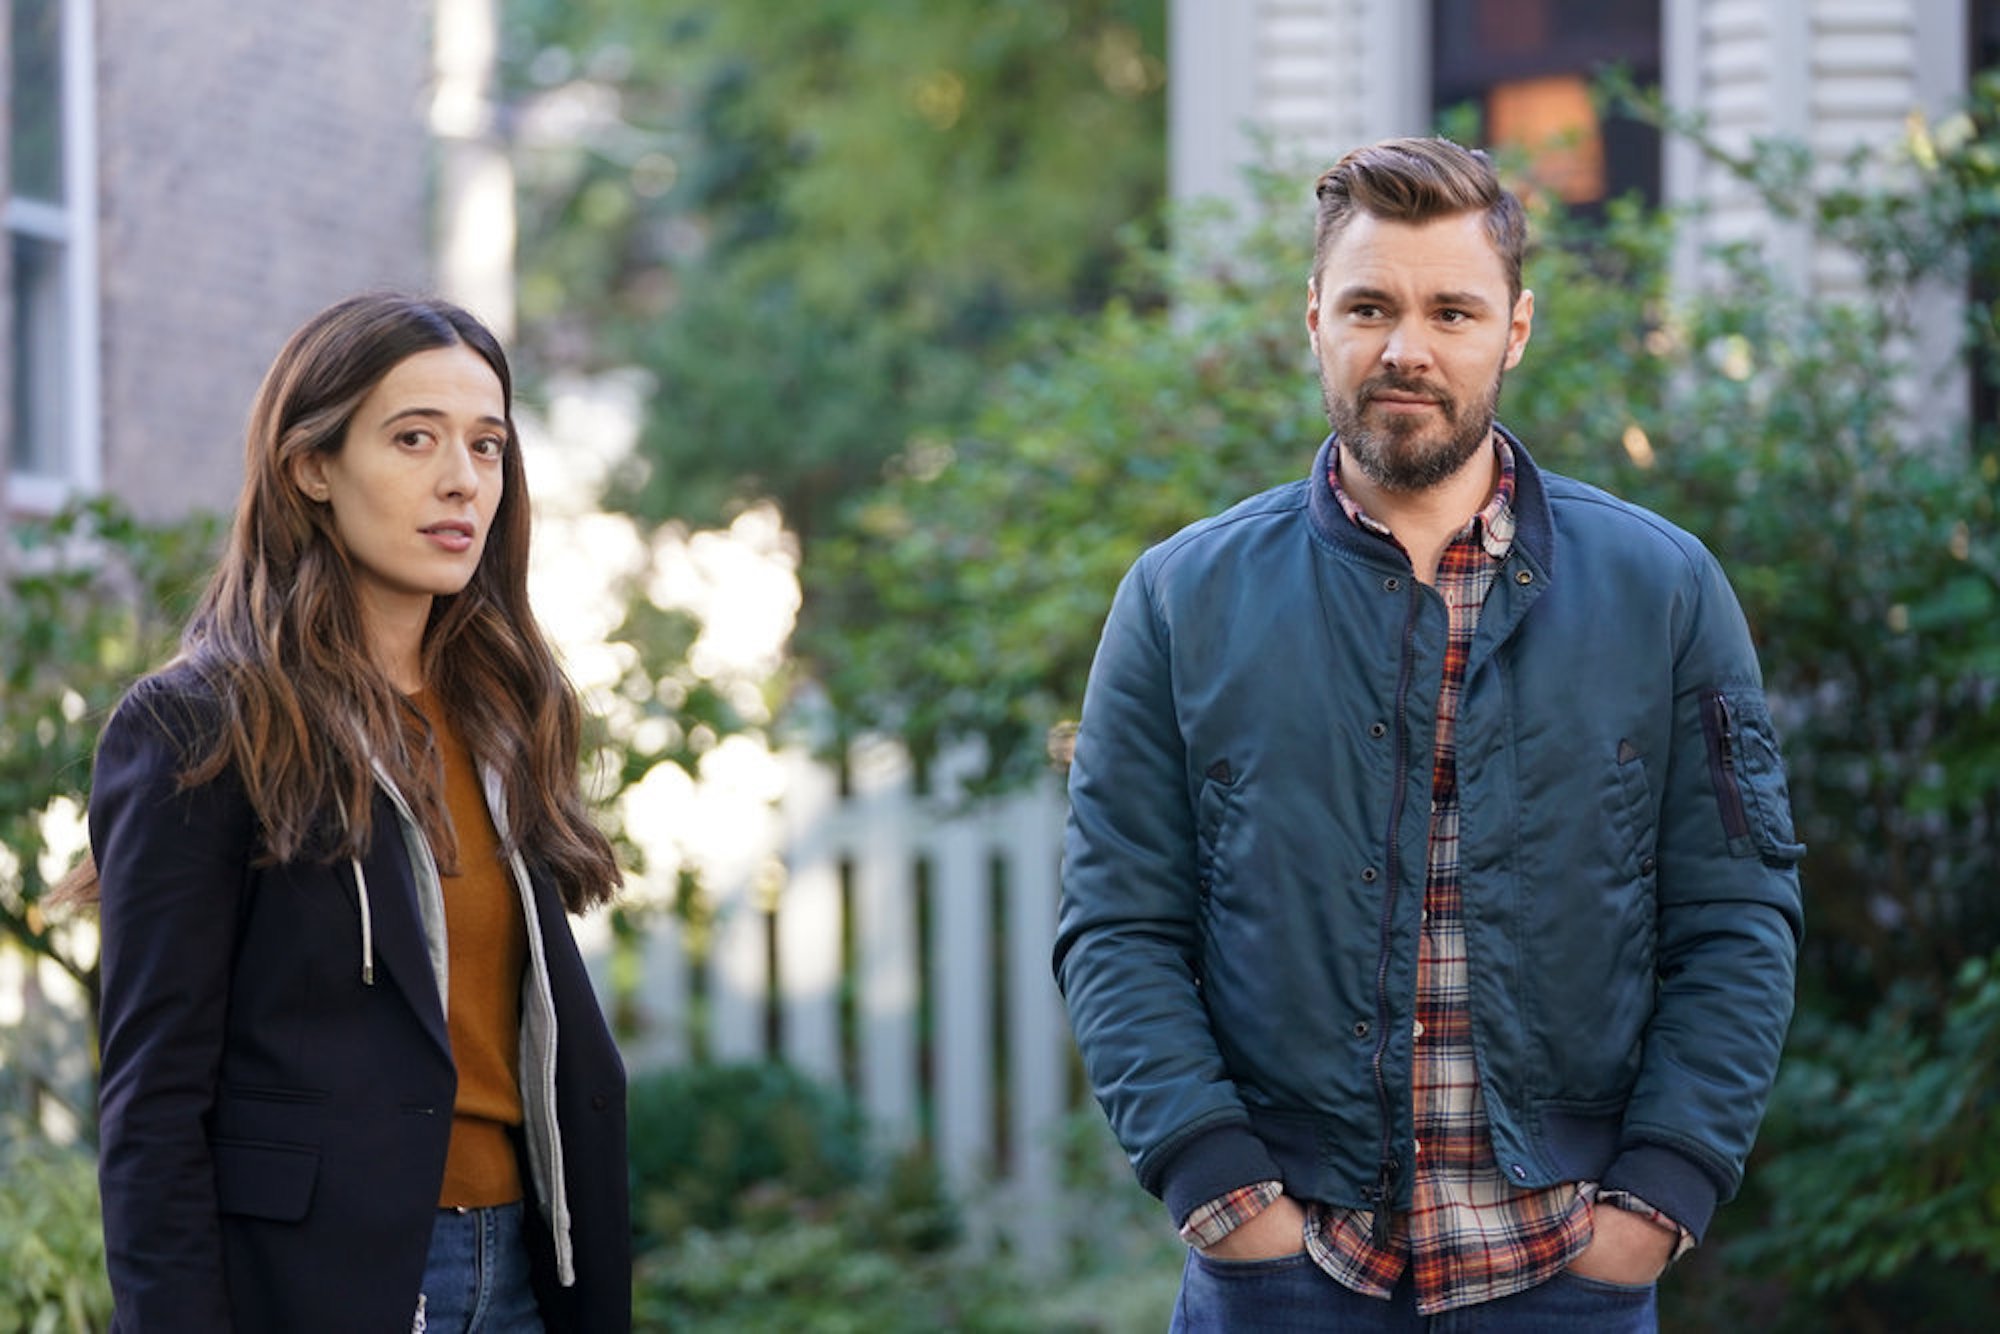 Kim Burgess and Adam Ruzek standing next to each other outdoors in 'Chicago P.D' Season 9